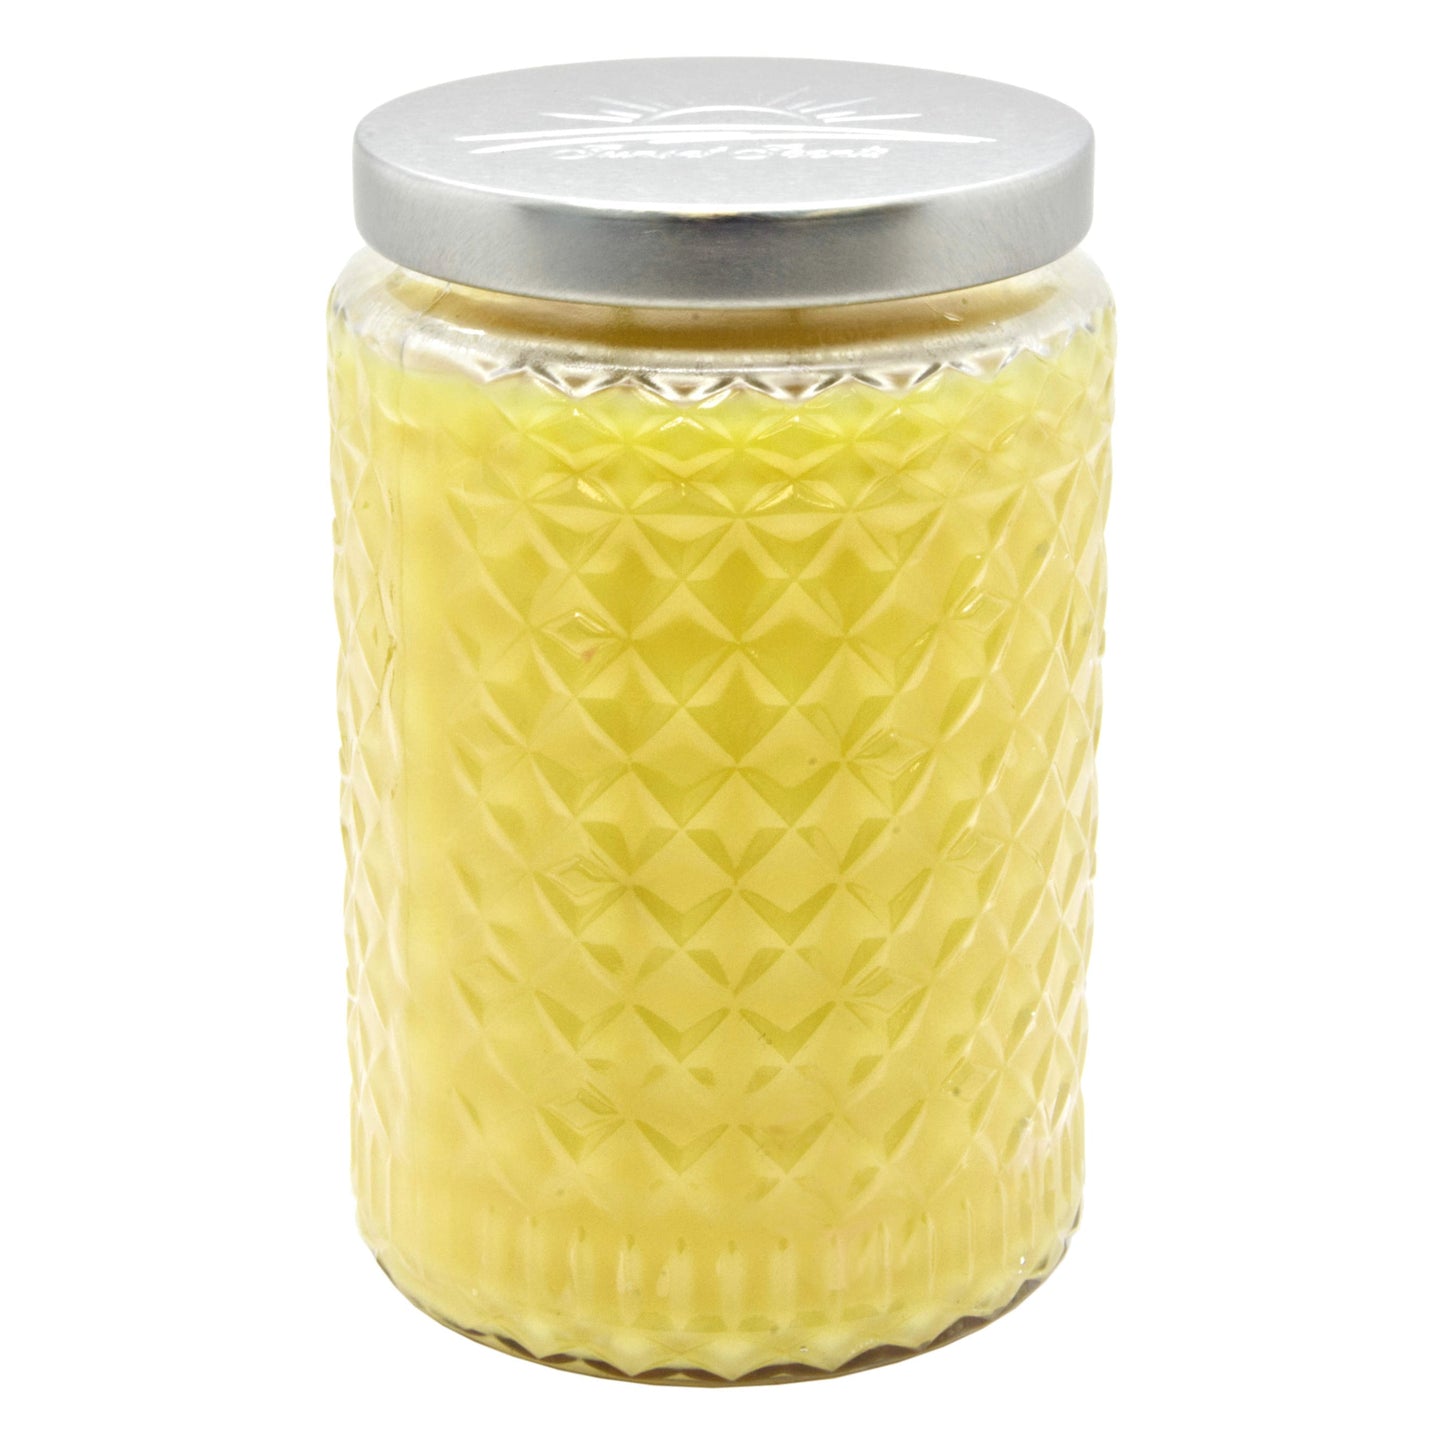 Pineapple Coast Scented Candle